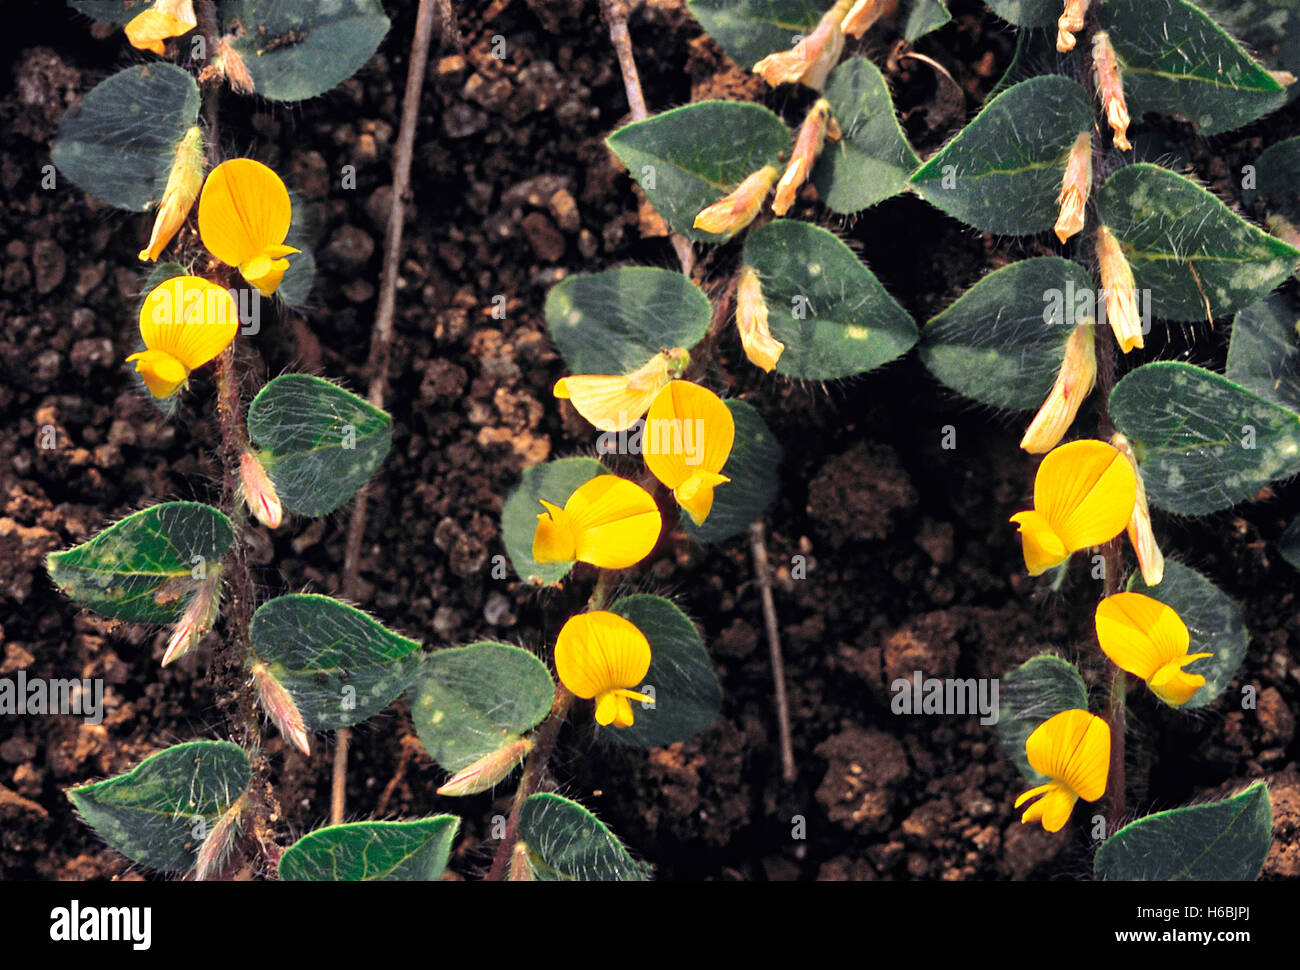 Heylandia Latebrosa. Family: Fabaceae. A prostrate weed common in fallow fields around Pune, India. Stock Photo